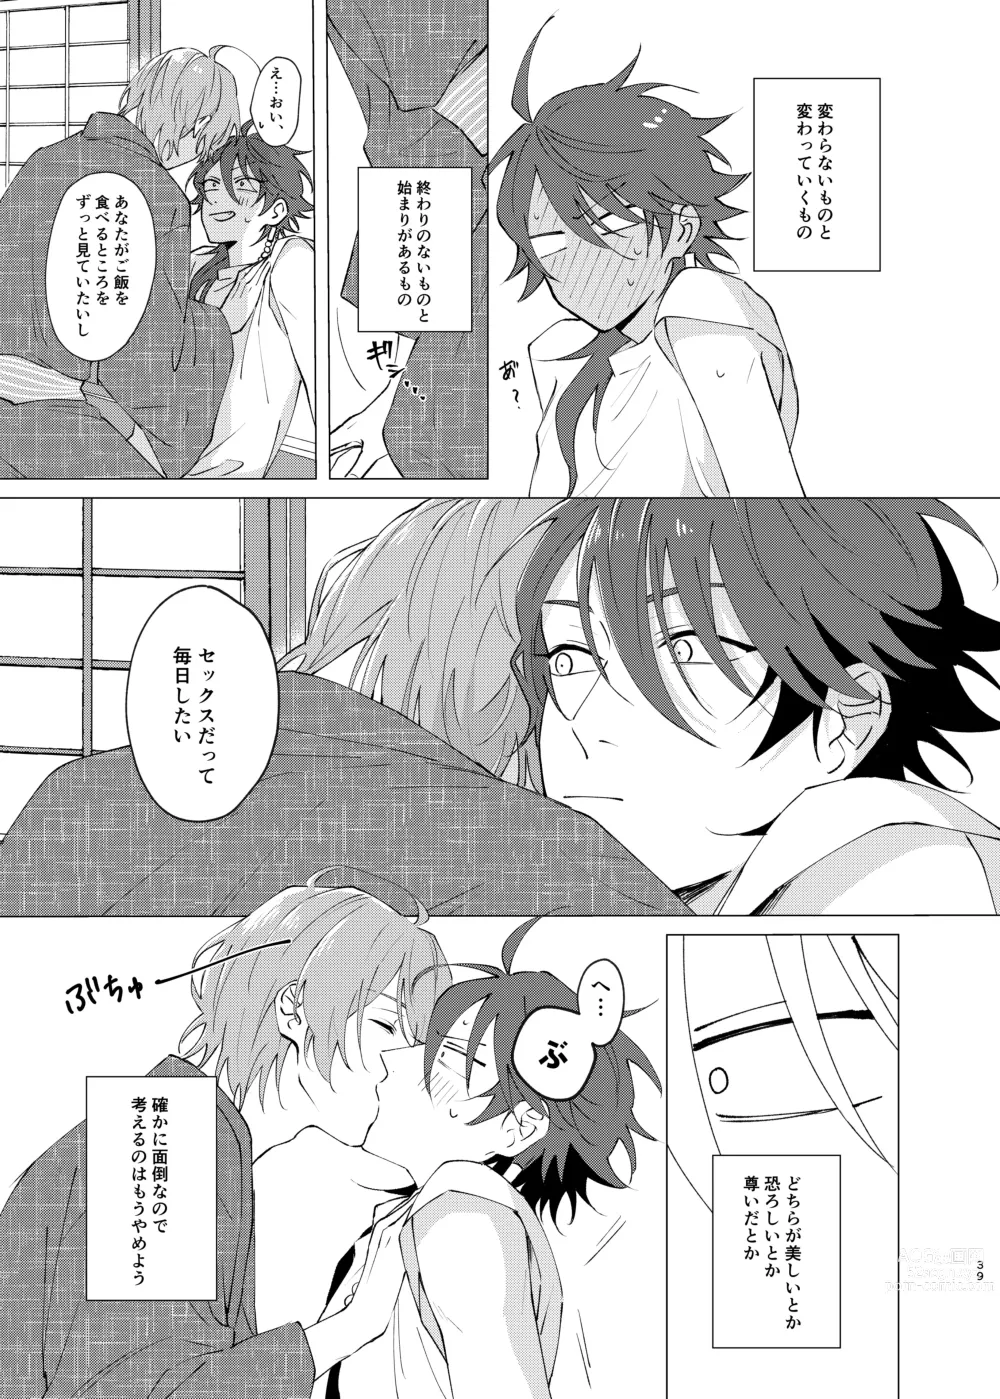 Page 37 of doujinshi Im leaving for good.